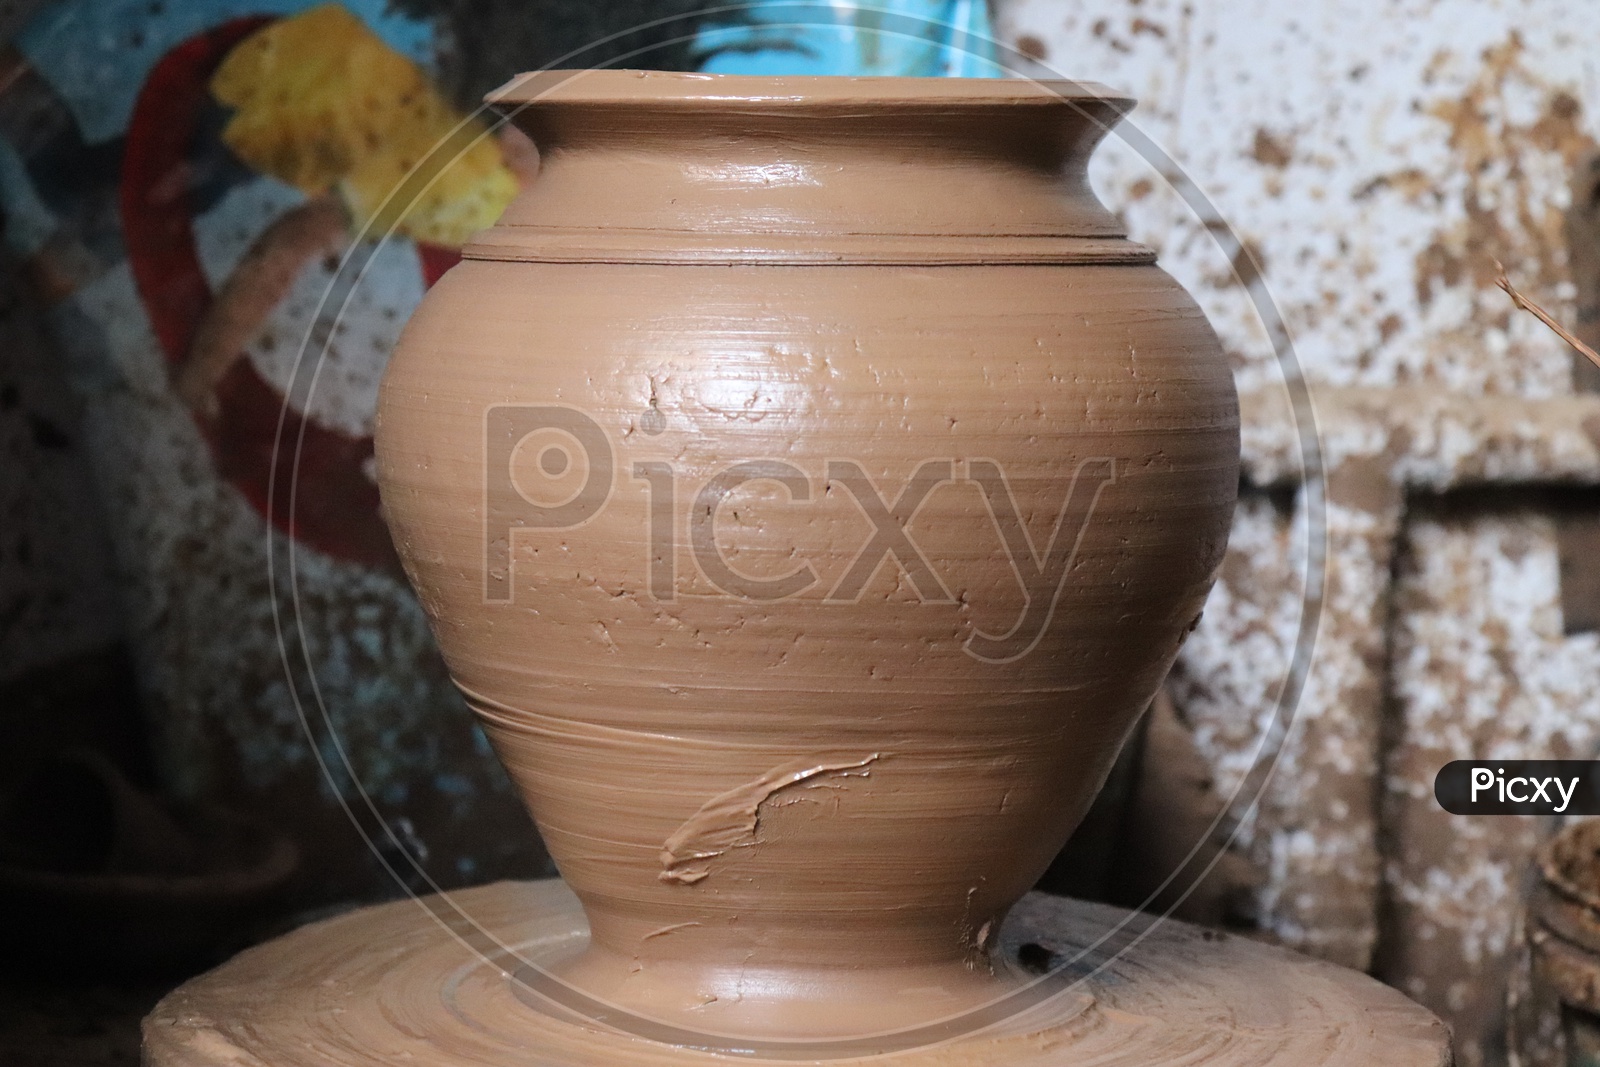 A Freshly Sculpted Clay As a Pot By a Potter on Pottery Wheel